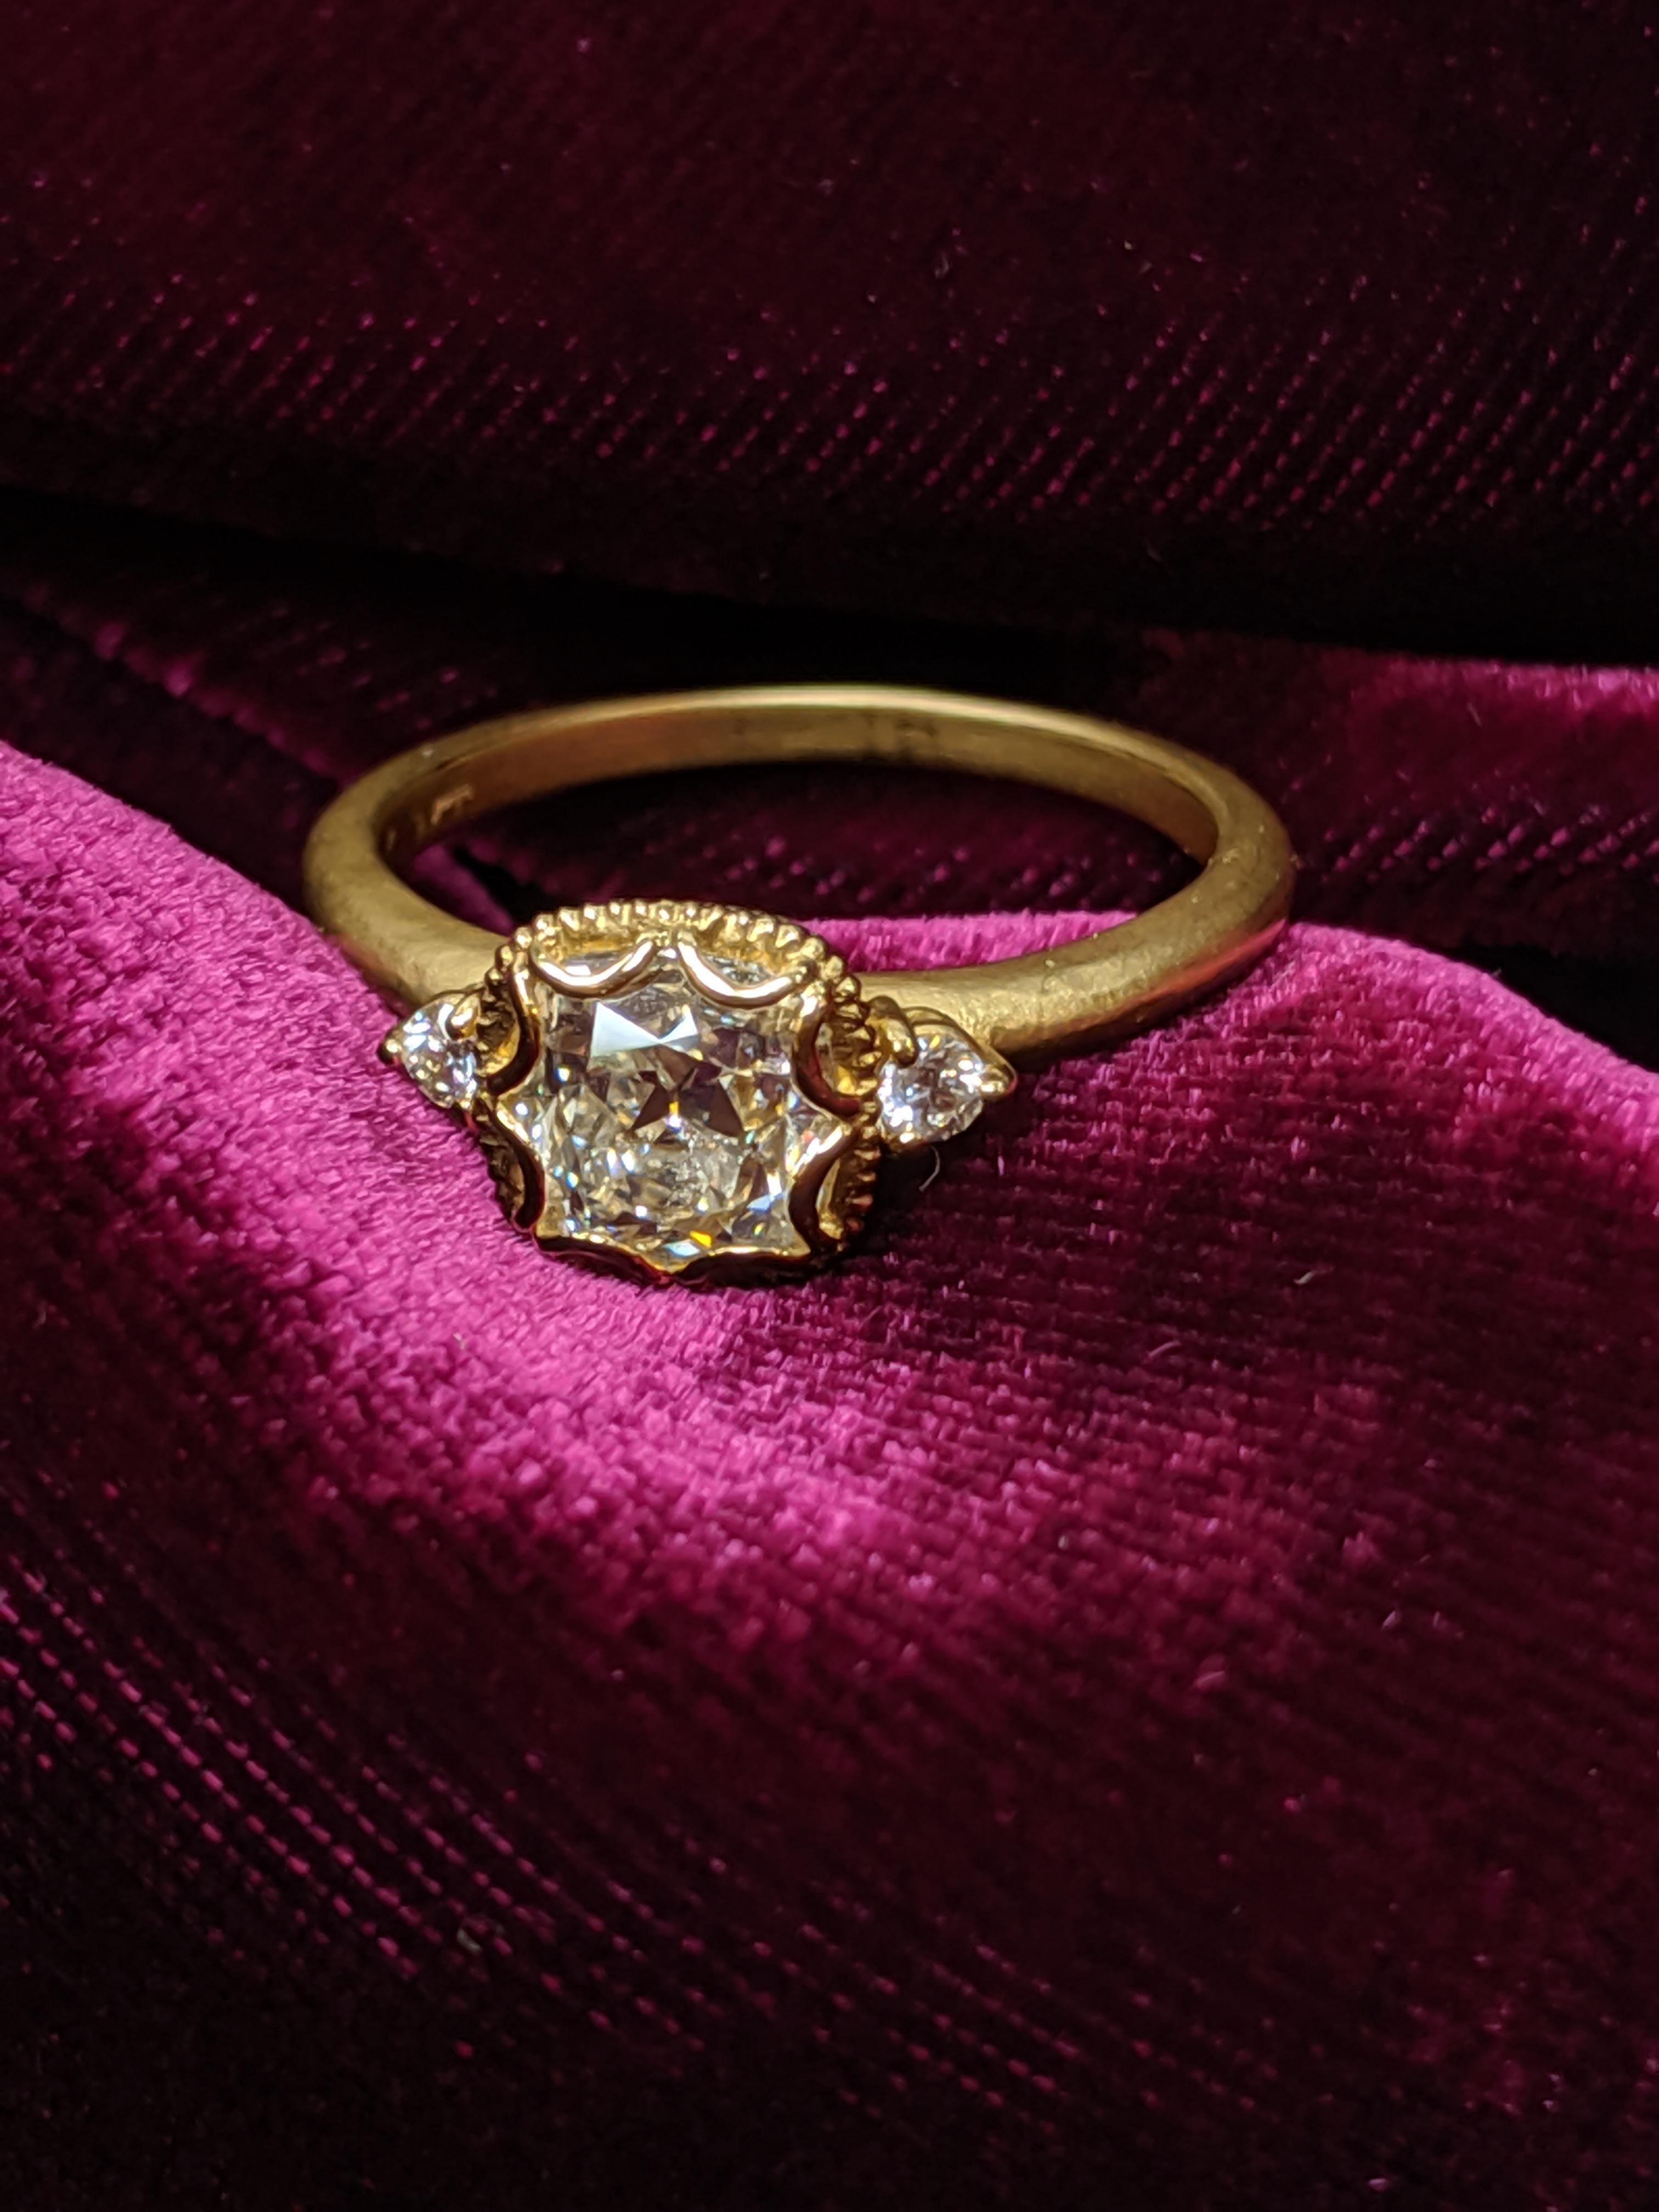 As if out of yesteryear a sweet Antique Cut Cushion Diamond ring in an 18 karat Yellow gold.  Center diamond is 1.07 carats with a GIA Report J VS1.  On either side are single smaller accent round brilliant diamonds.  This ring mounting is